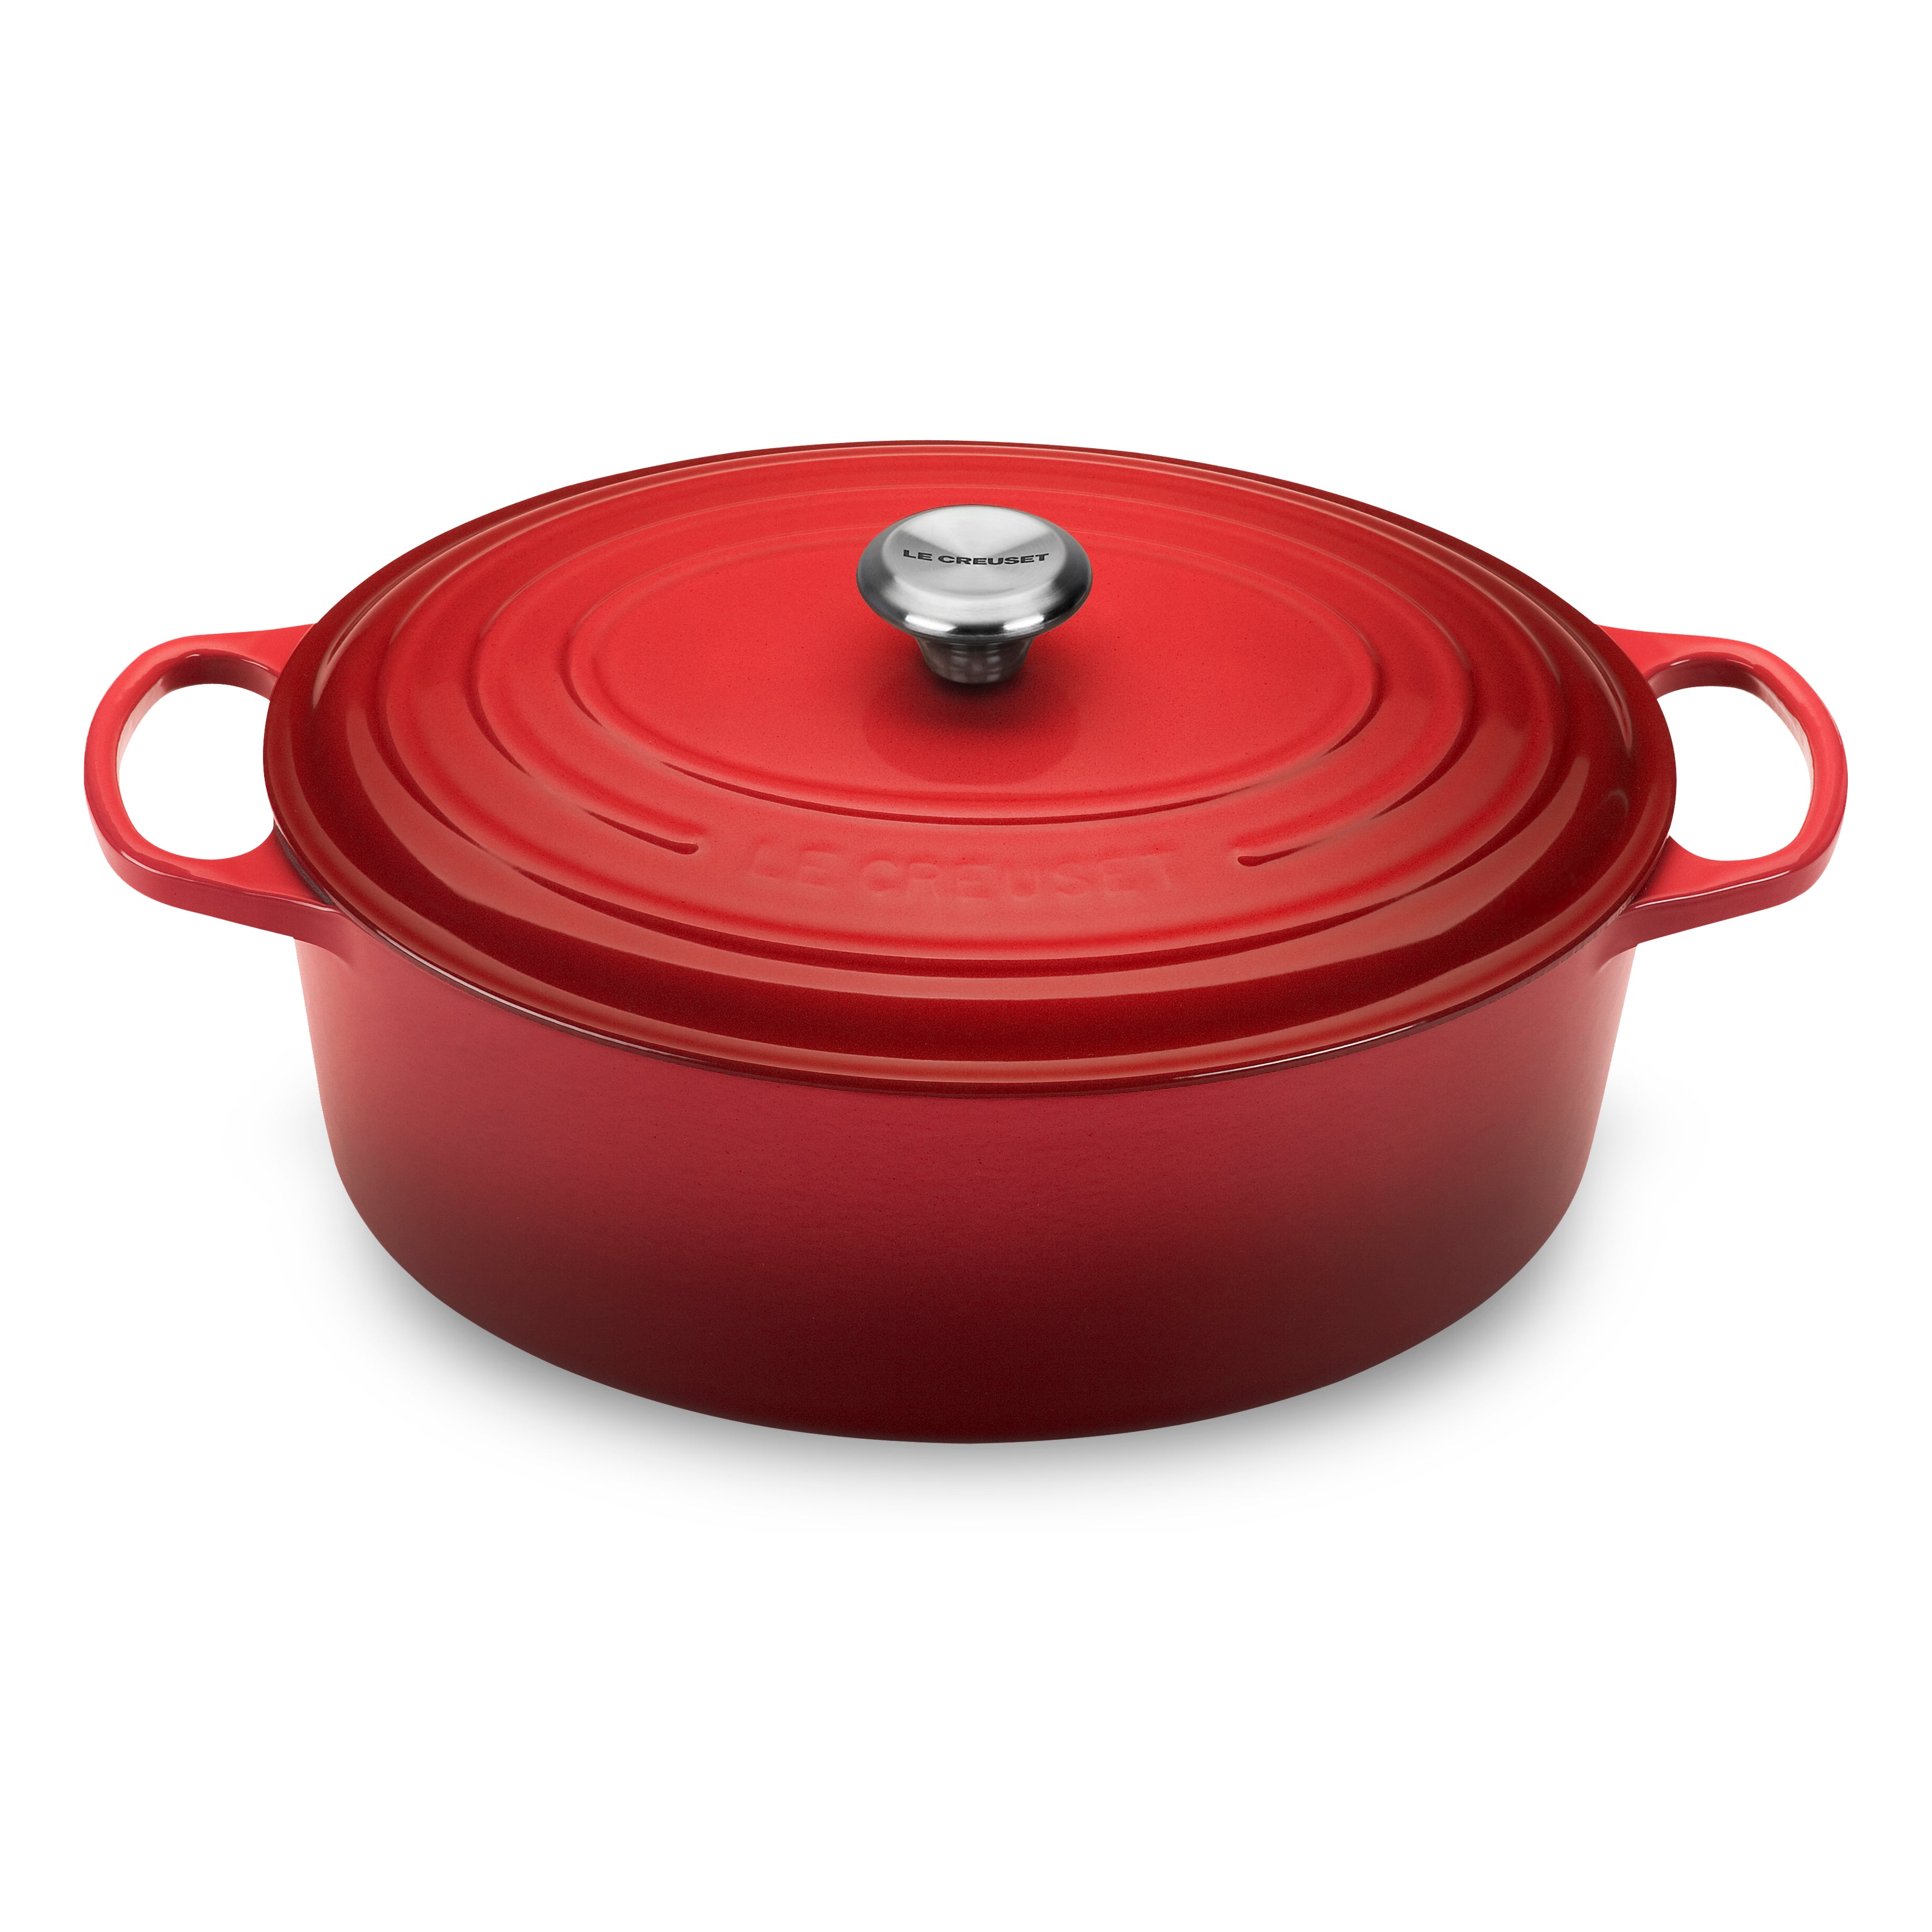 Le Creuset 2 3/4 qt Oval Cerise Red Enameled Cast Iron Signature French Oven  - 10 9/10L x 9W x 5 4/5H